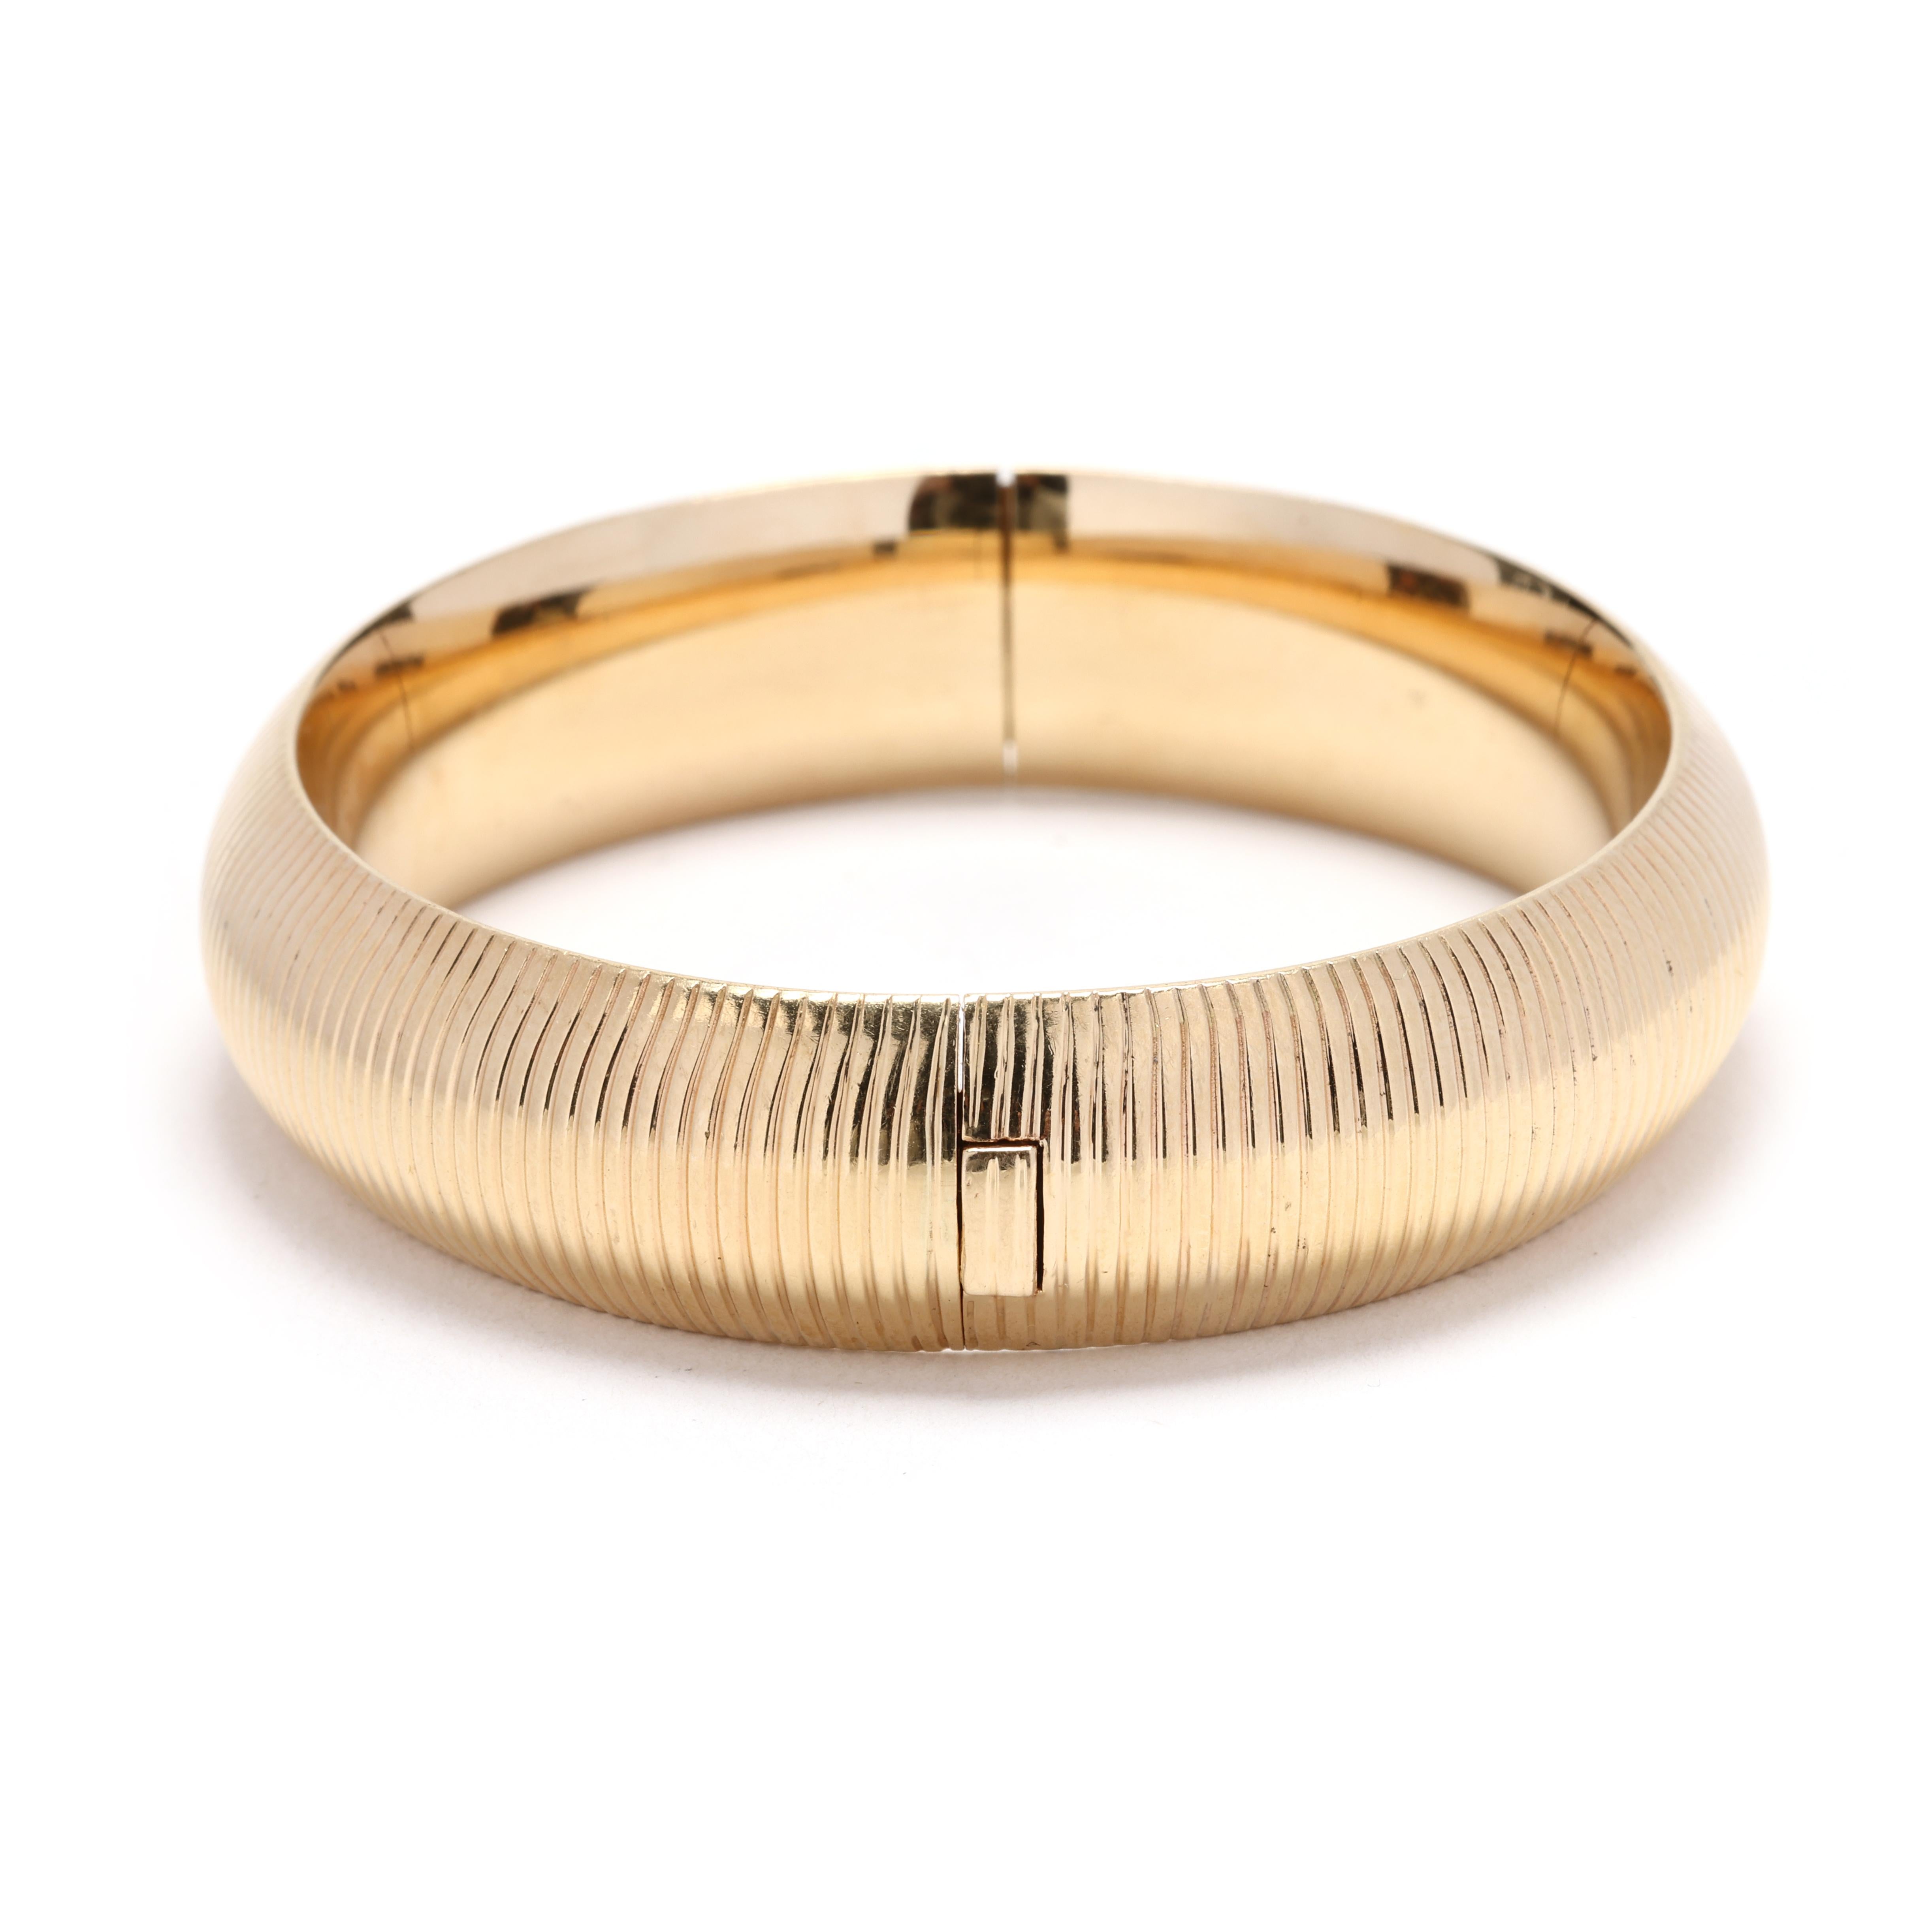 Bangle bracelets are versatile accessories that can add a touch of elegance to any outfit, and this 14k yellow gold ribbed bangle is no exception. Measuring 6.75 inches in length and boasting a thick design, this bangle makes a bold statement on the